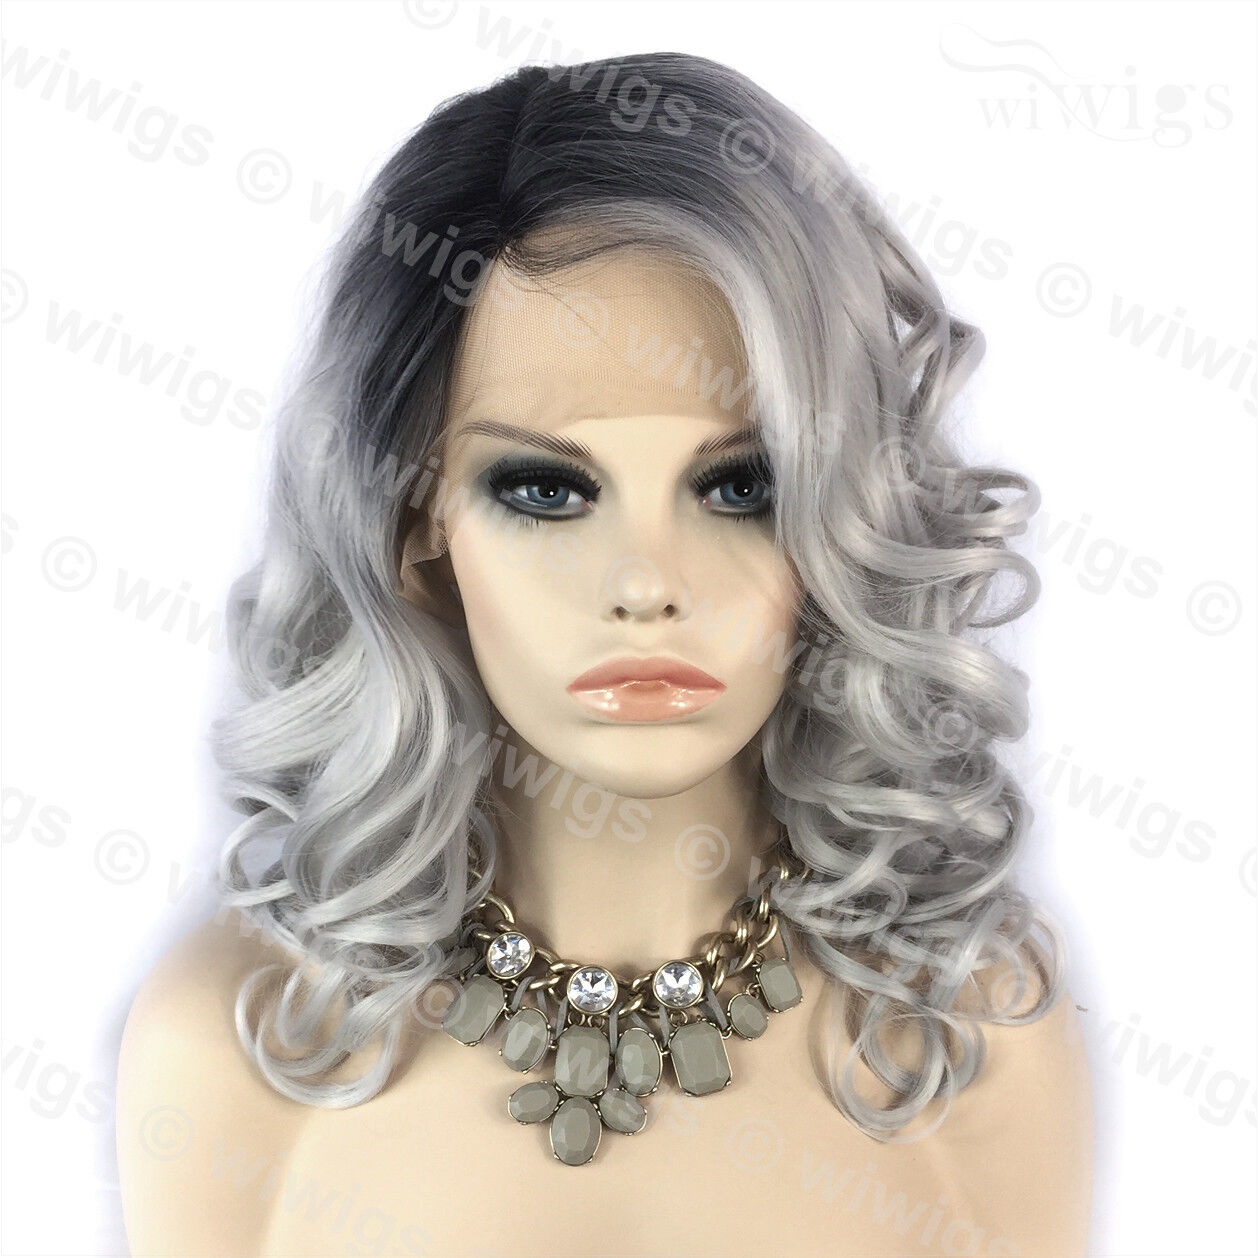 Details Zu Wiwigs Ombre 2 Tones Lace Front Wig Curly Dark Roots Long Silver Grey Hair